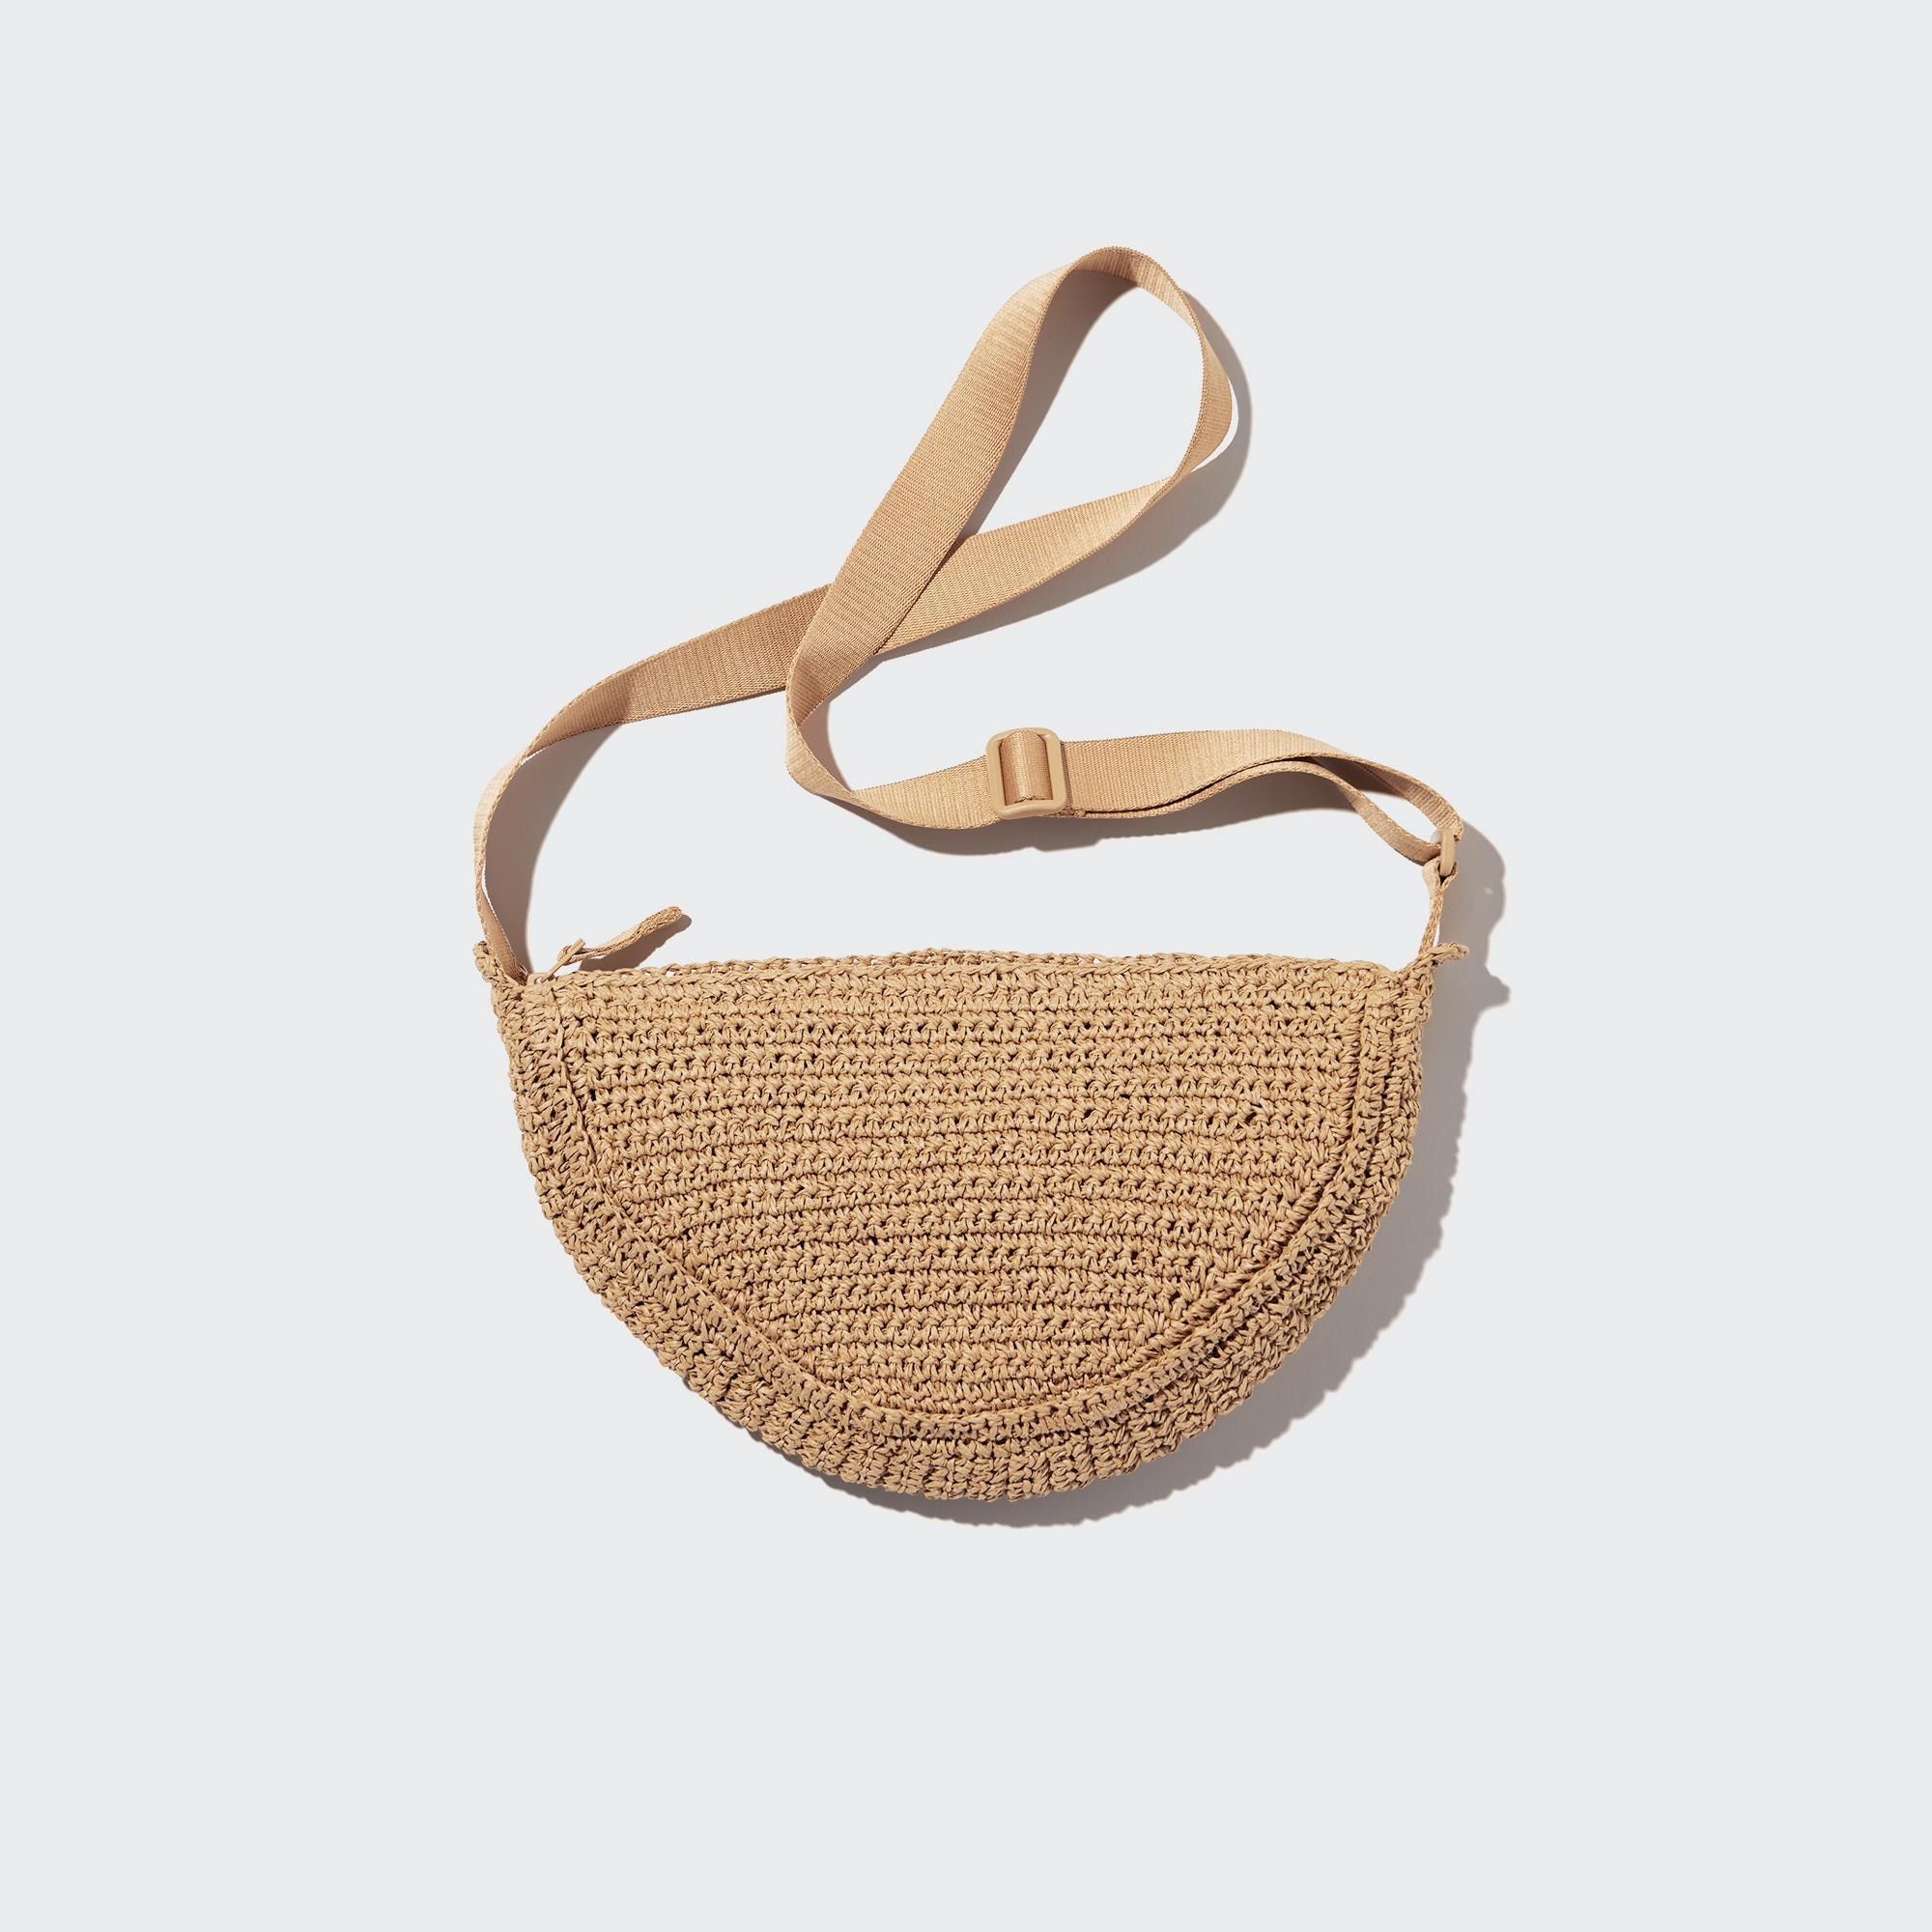 uniqlo's crochet version of its crossbody bag is here